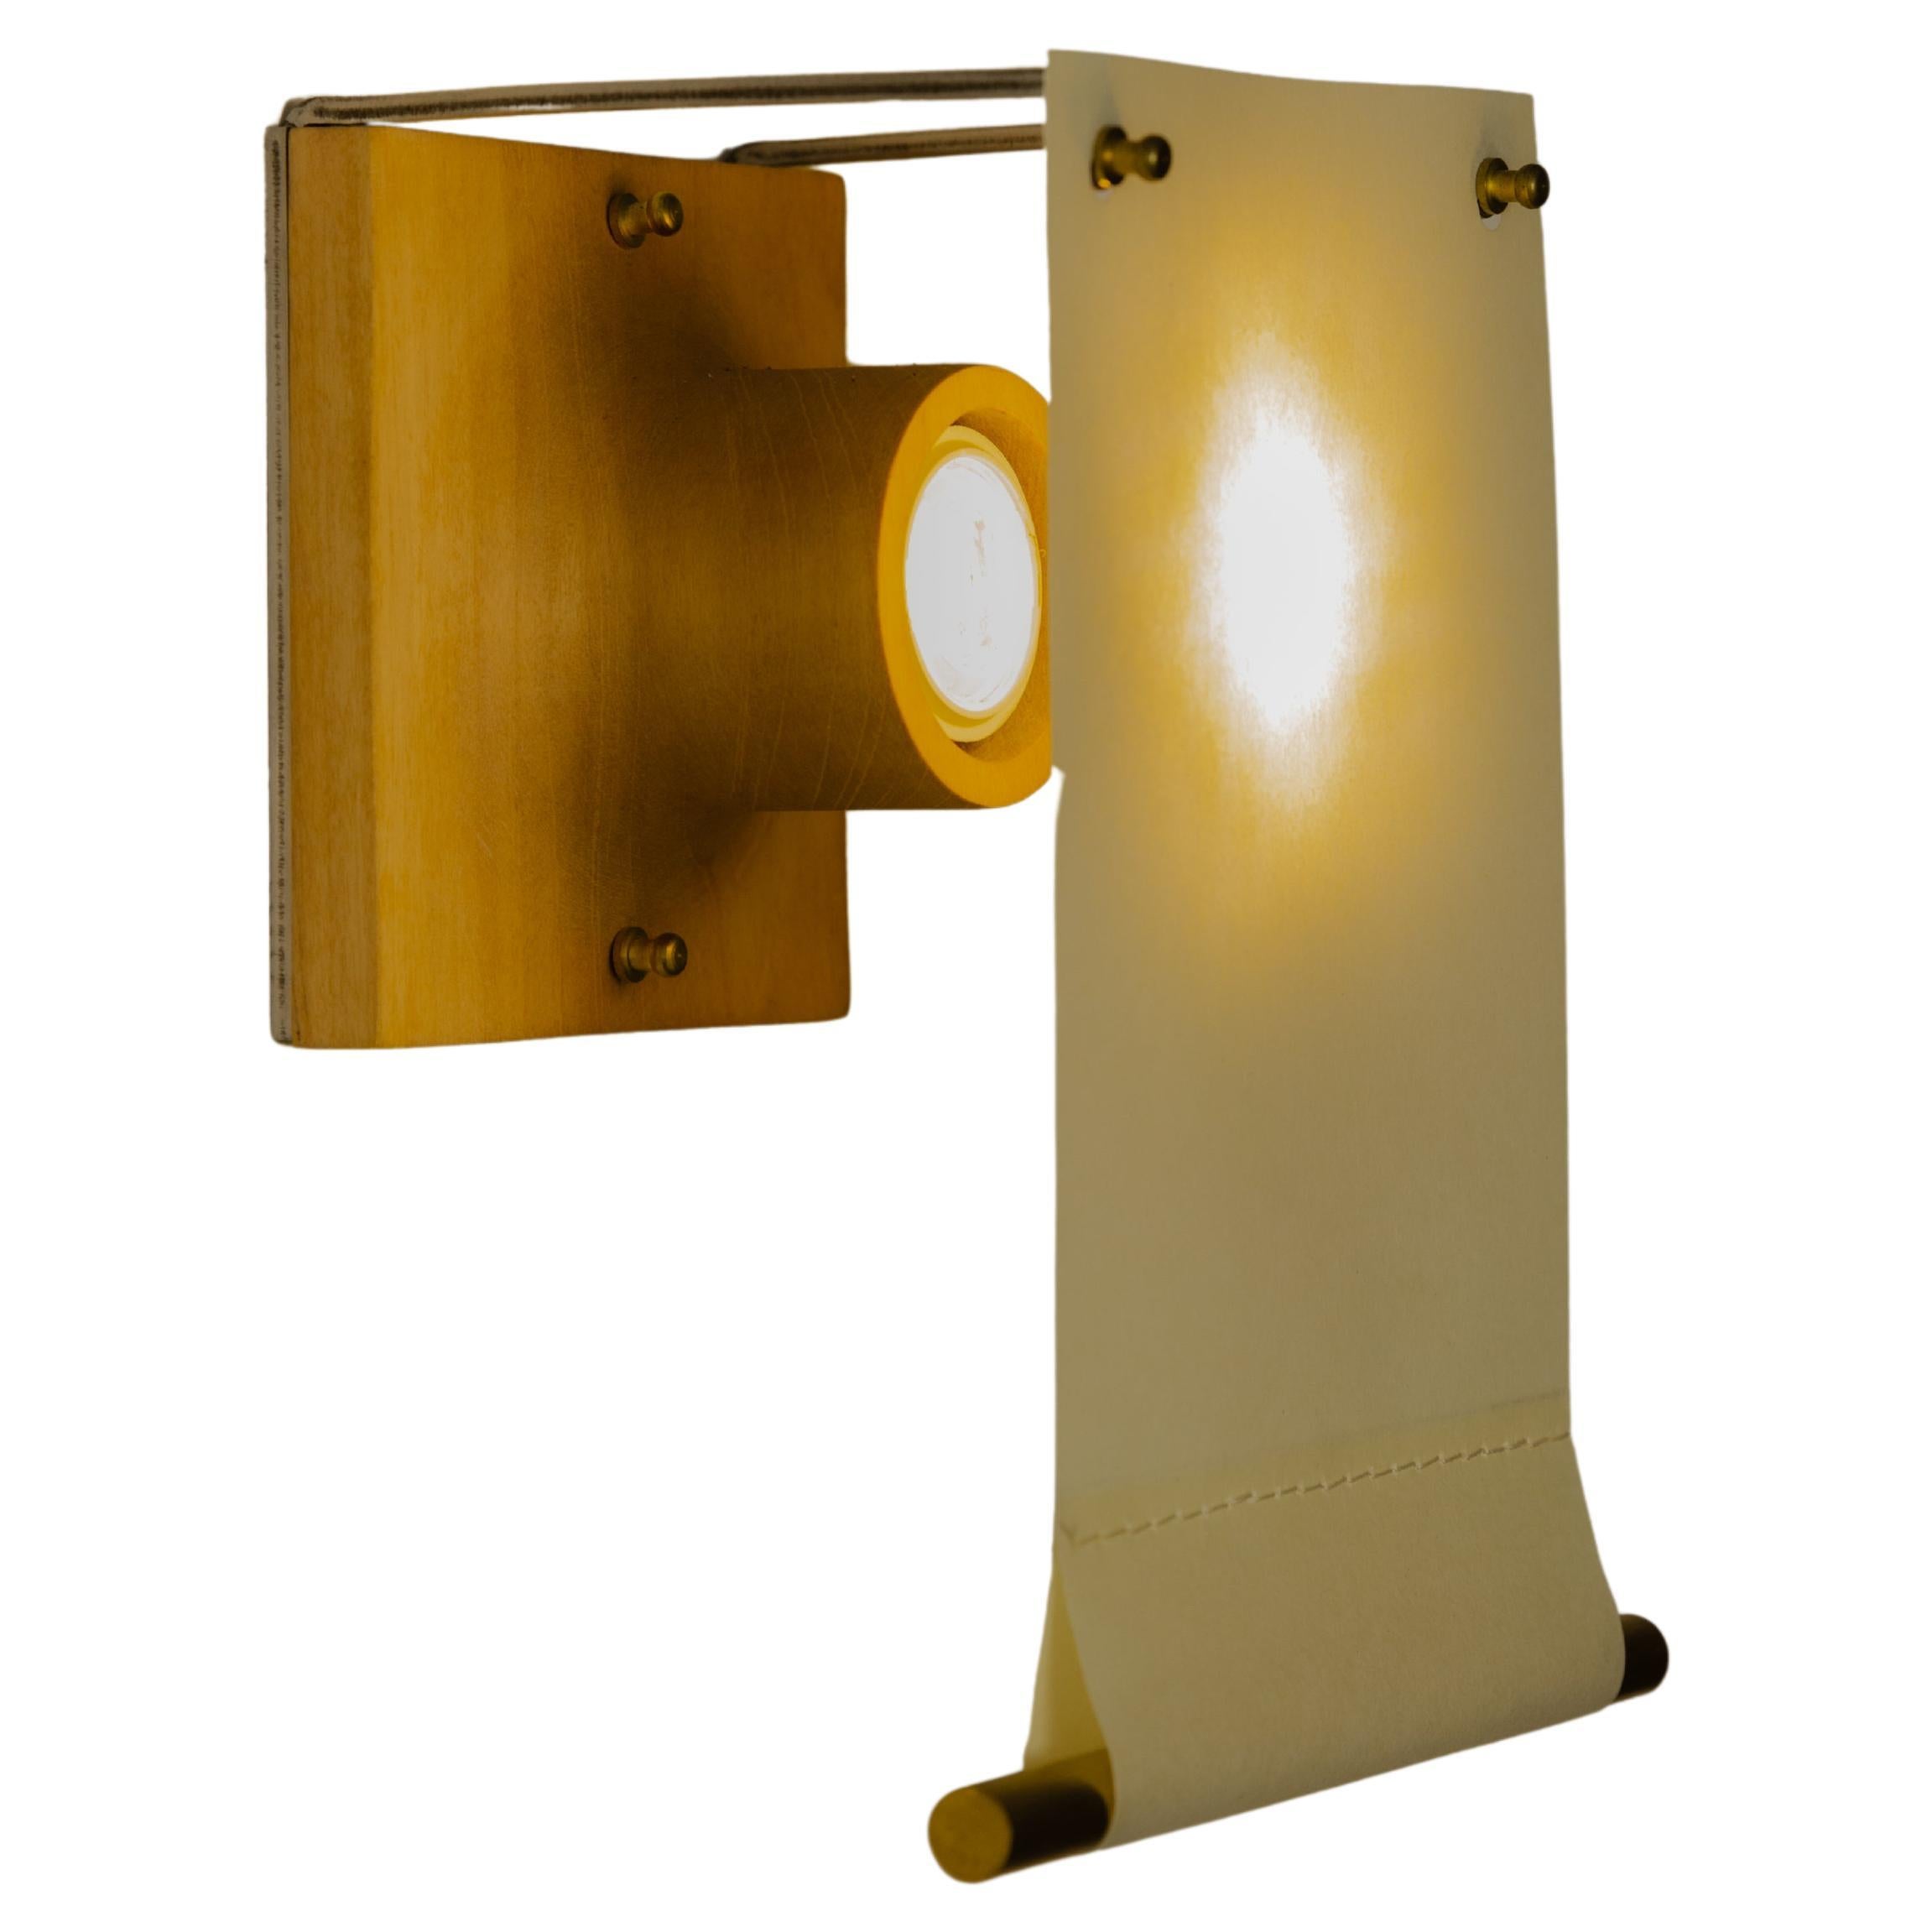 Satellite Collection - Folha Wall Lamp by Pedro Ávila For Sale